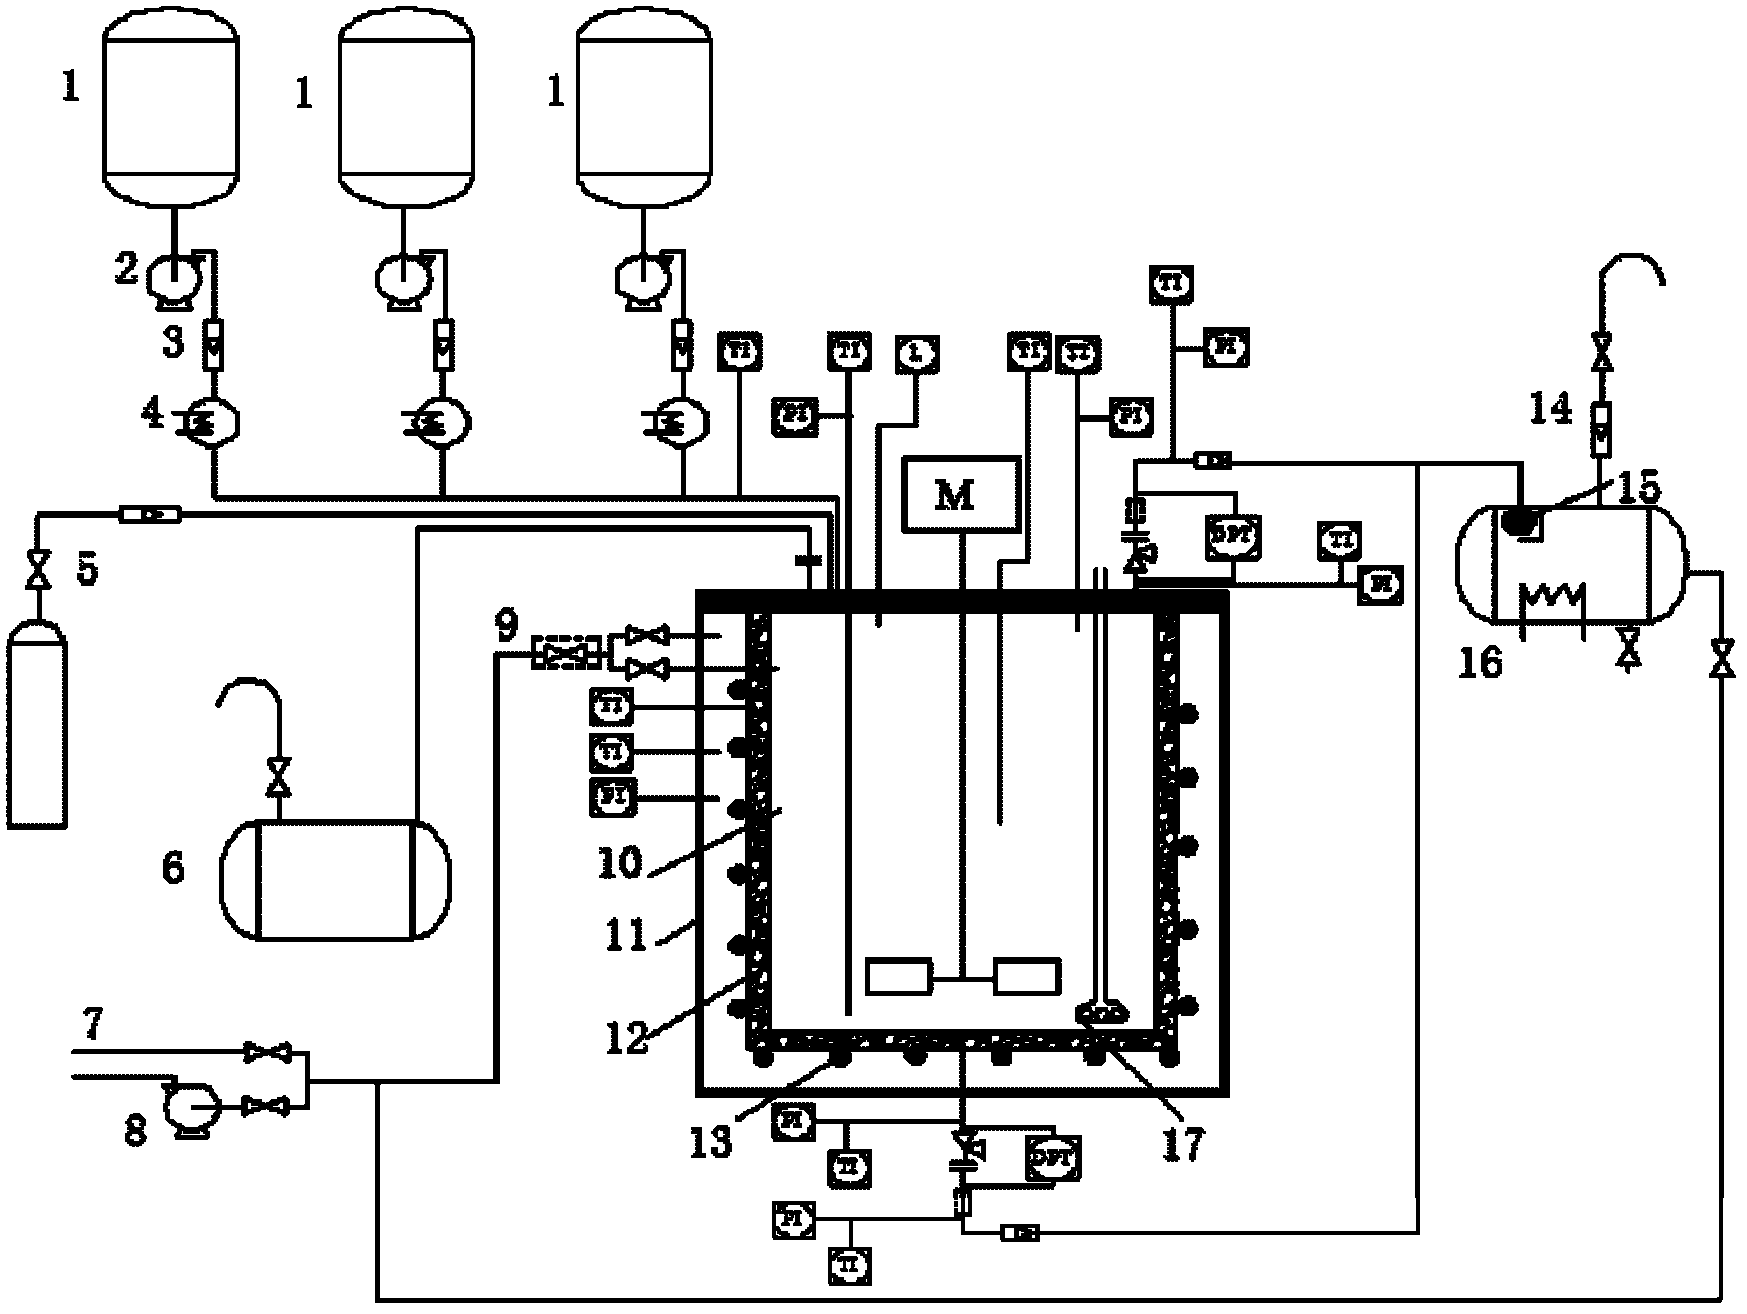 Simulation experiment device in petrochemical apparatus during emergent relief process